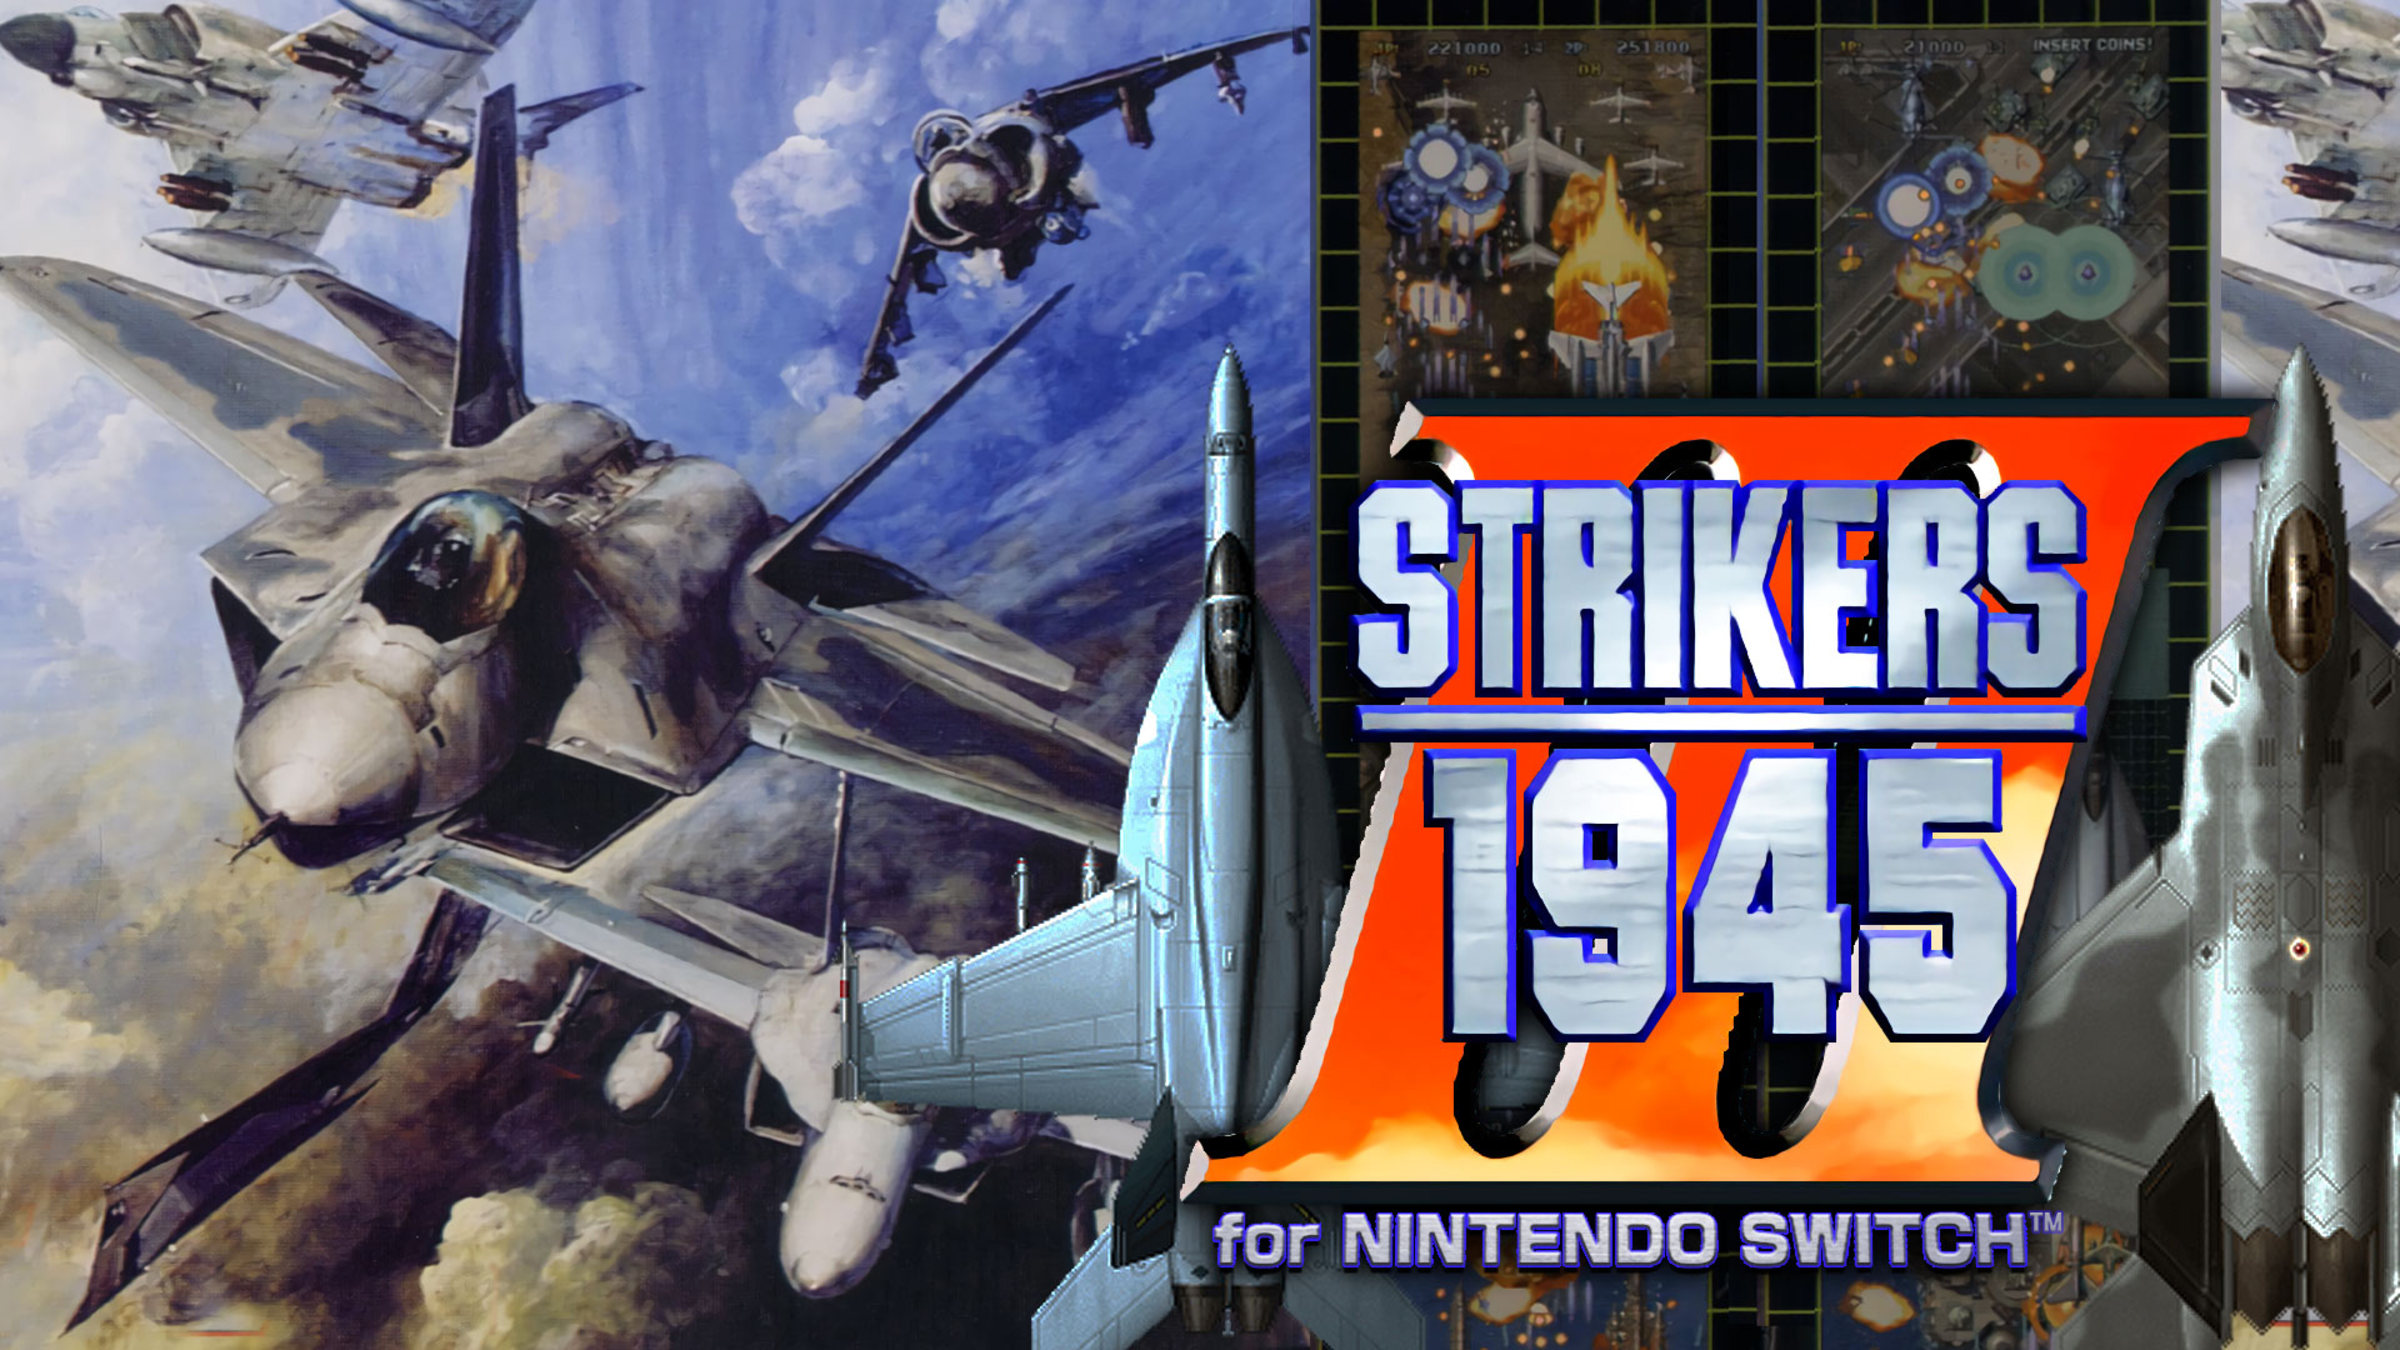 STRIKERS 1945 III for Nintendo Switch™ for Nintendo Switch